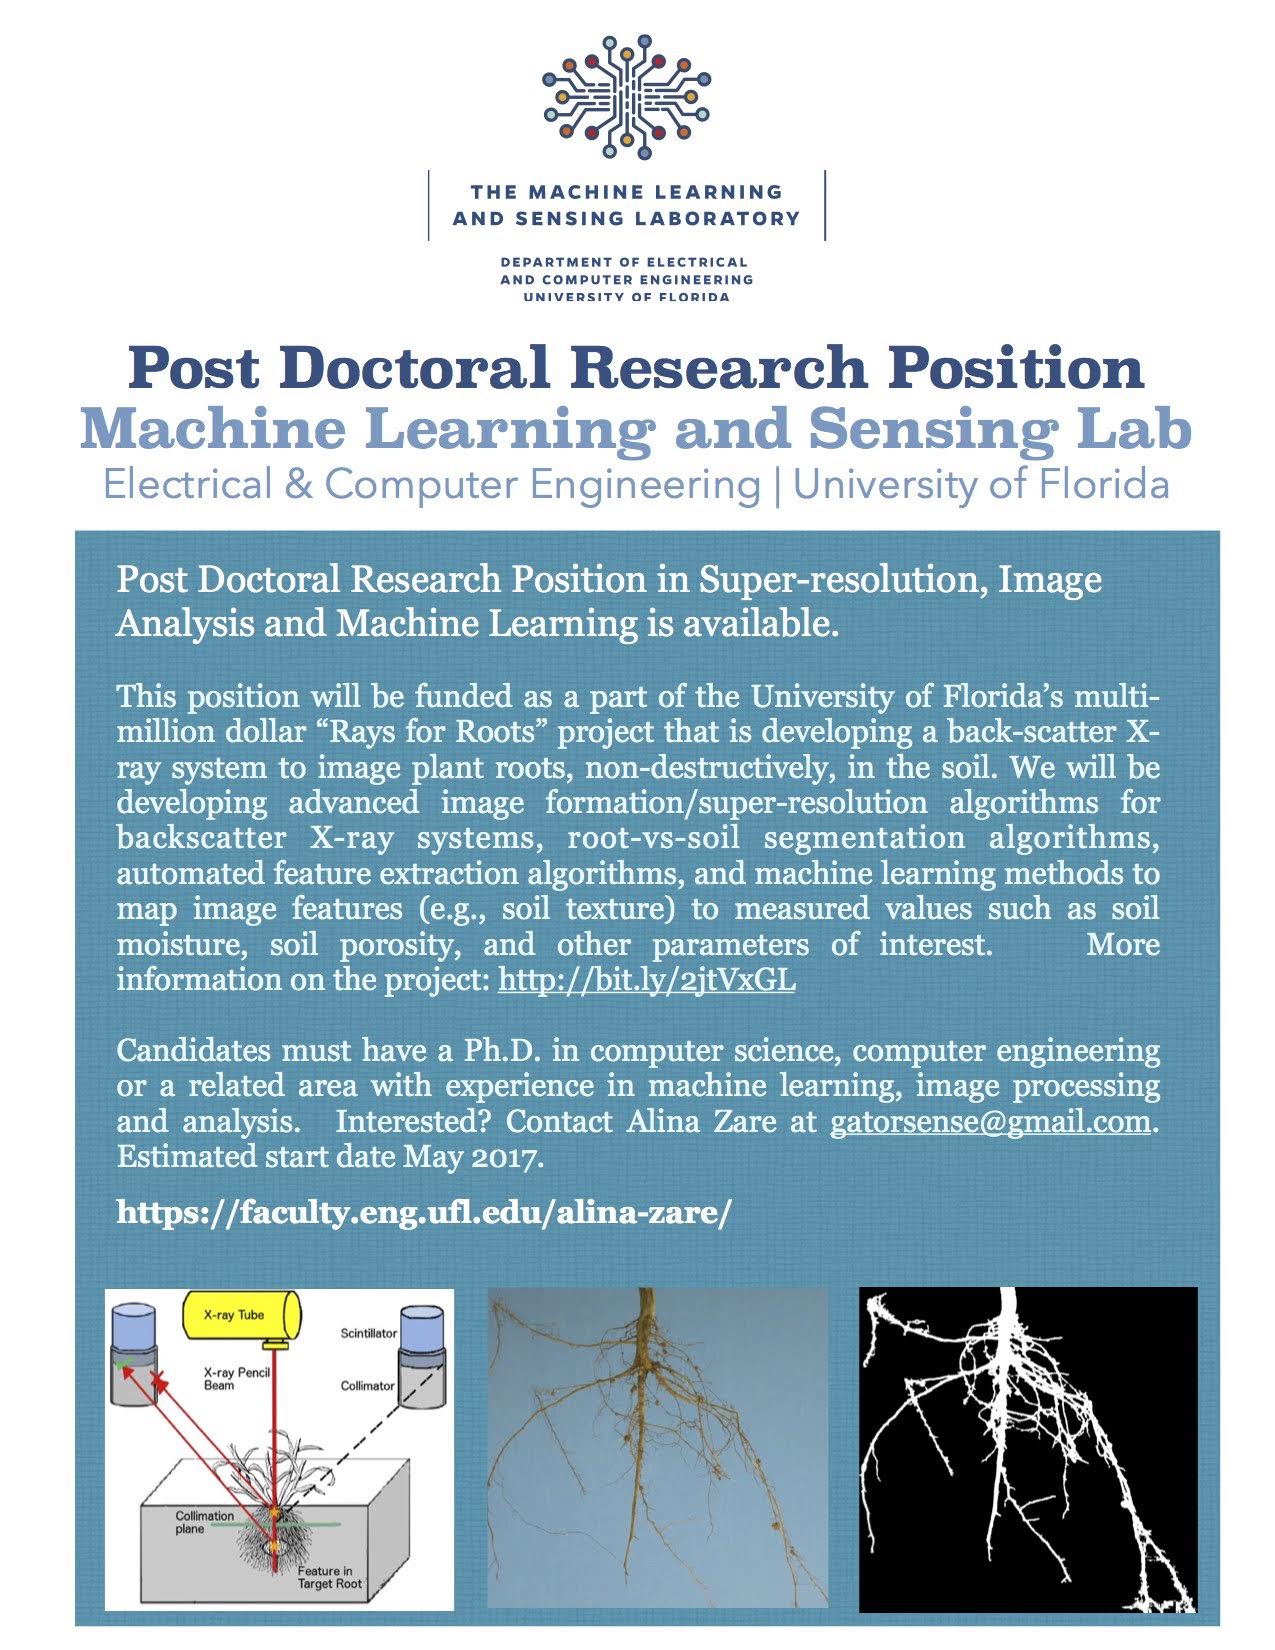 Research proposal machine learning